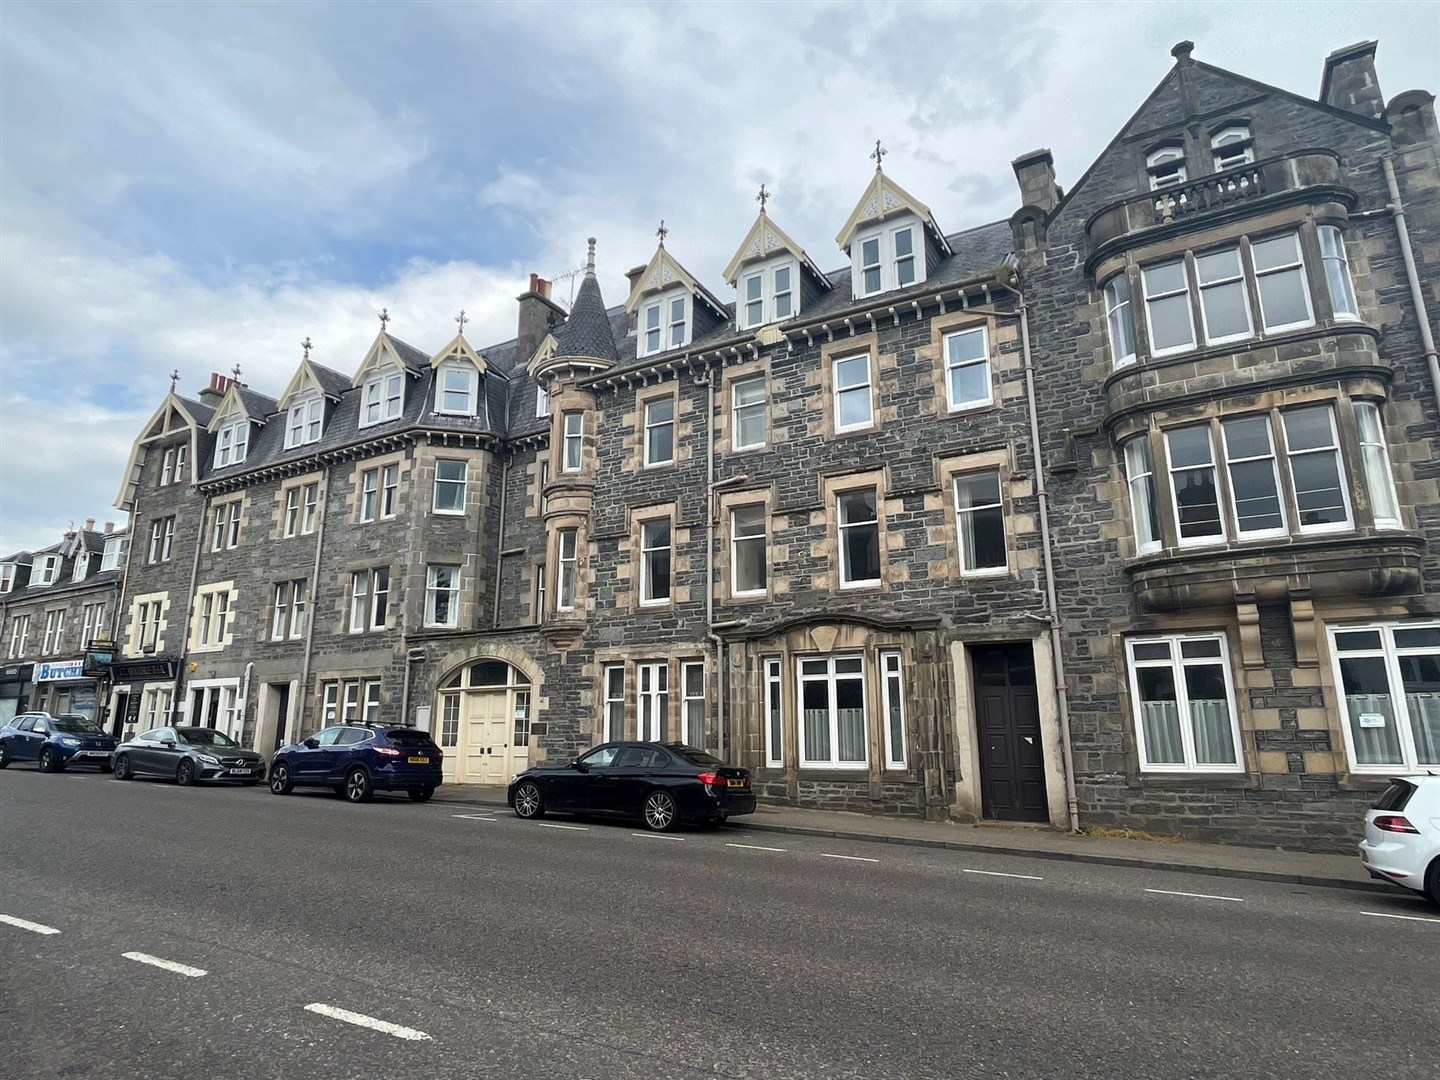 The former "Grandview House" occupies a key site in the middle of Grantown's High Street. Now it could provide desperately-needed affordable flats for local employees.